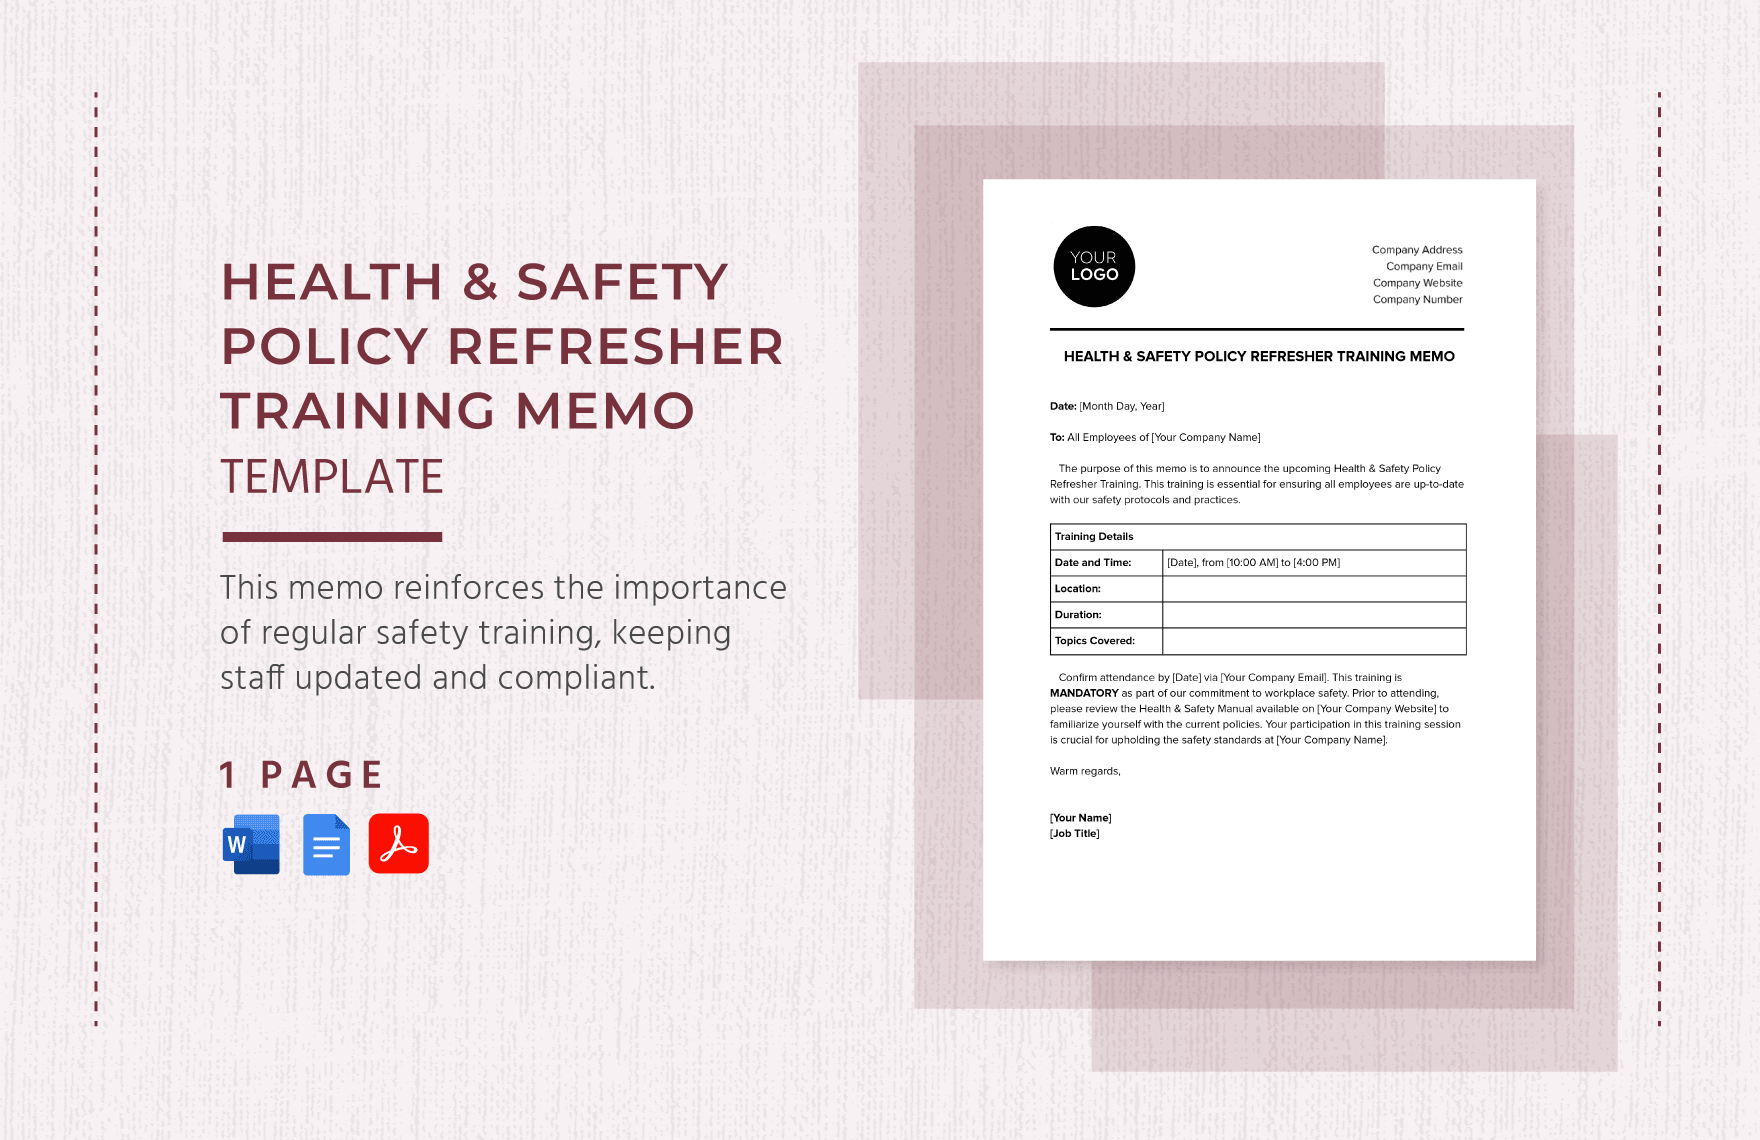 Health & Safety Policy Refresher Training Memo Template